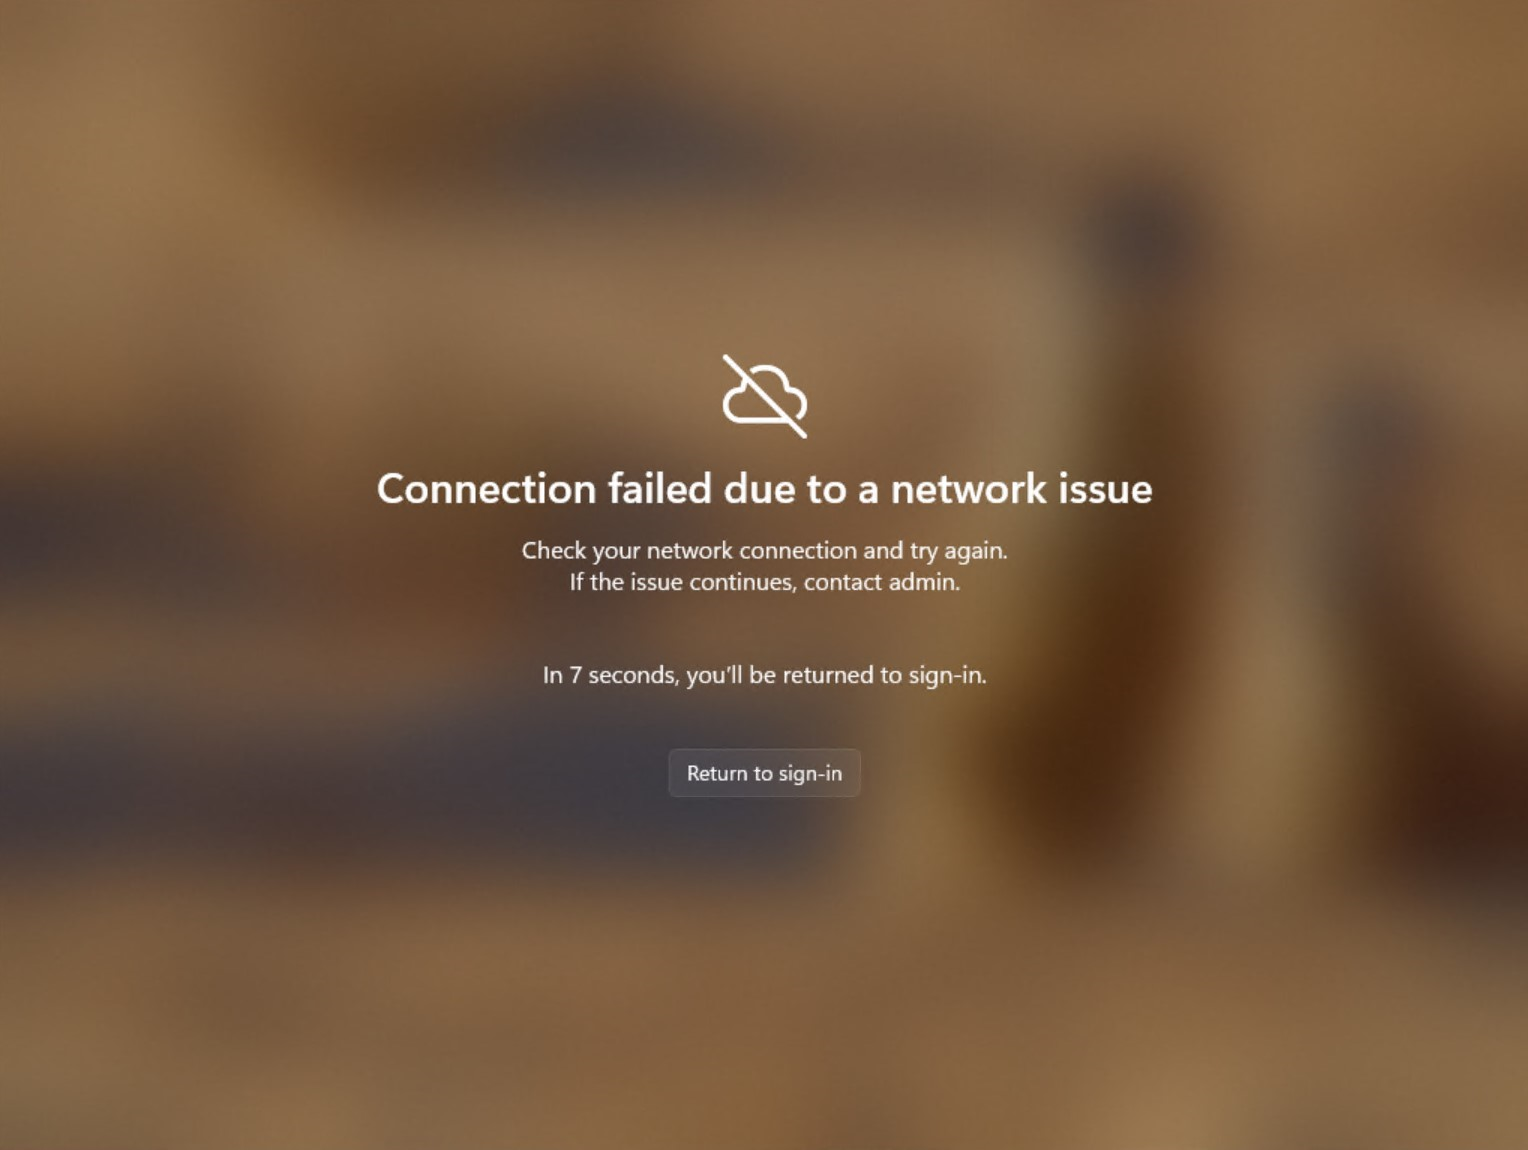 Notification when there are network issues trying to connect